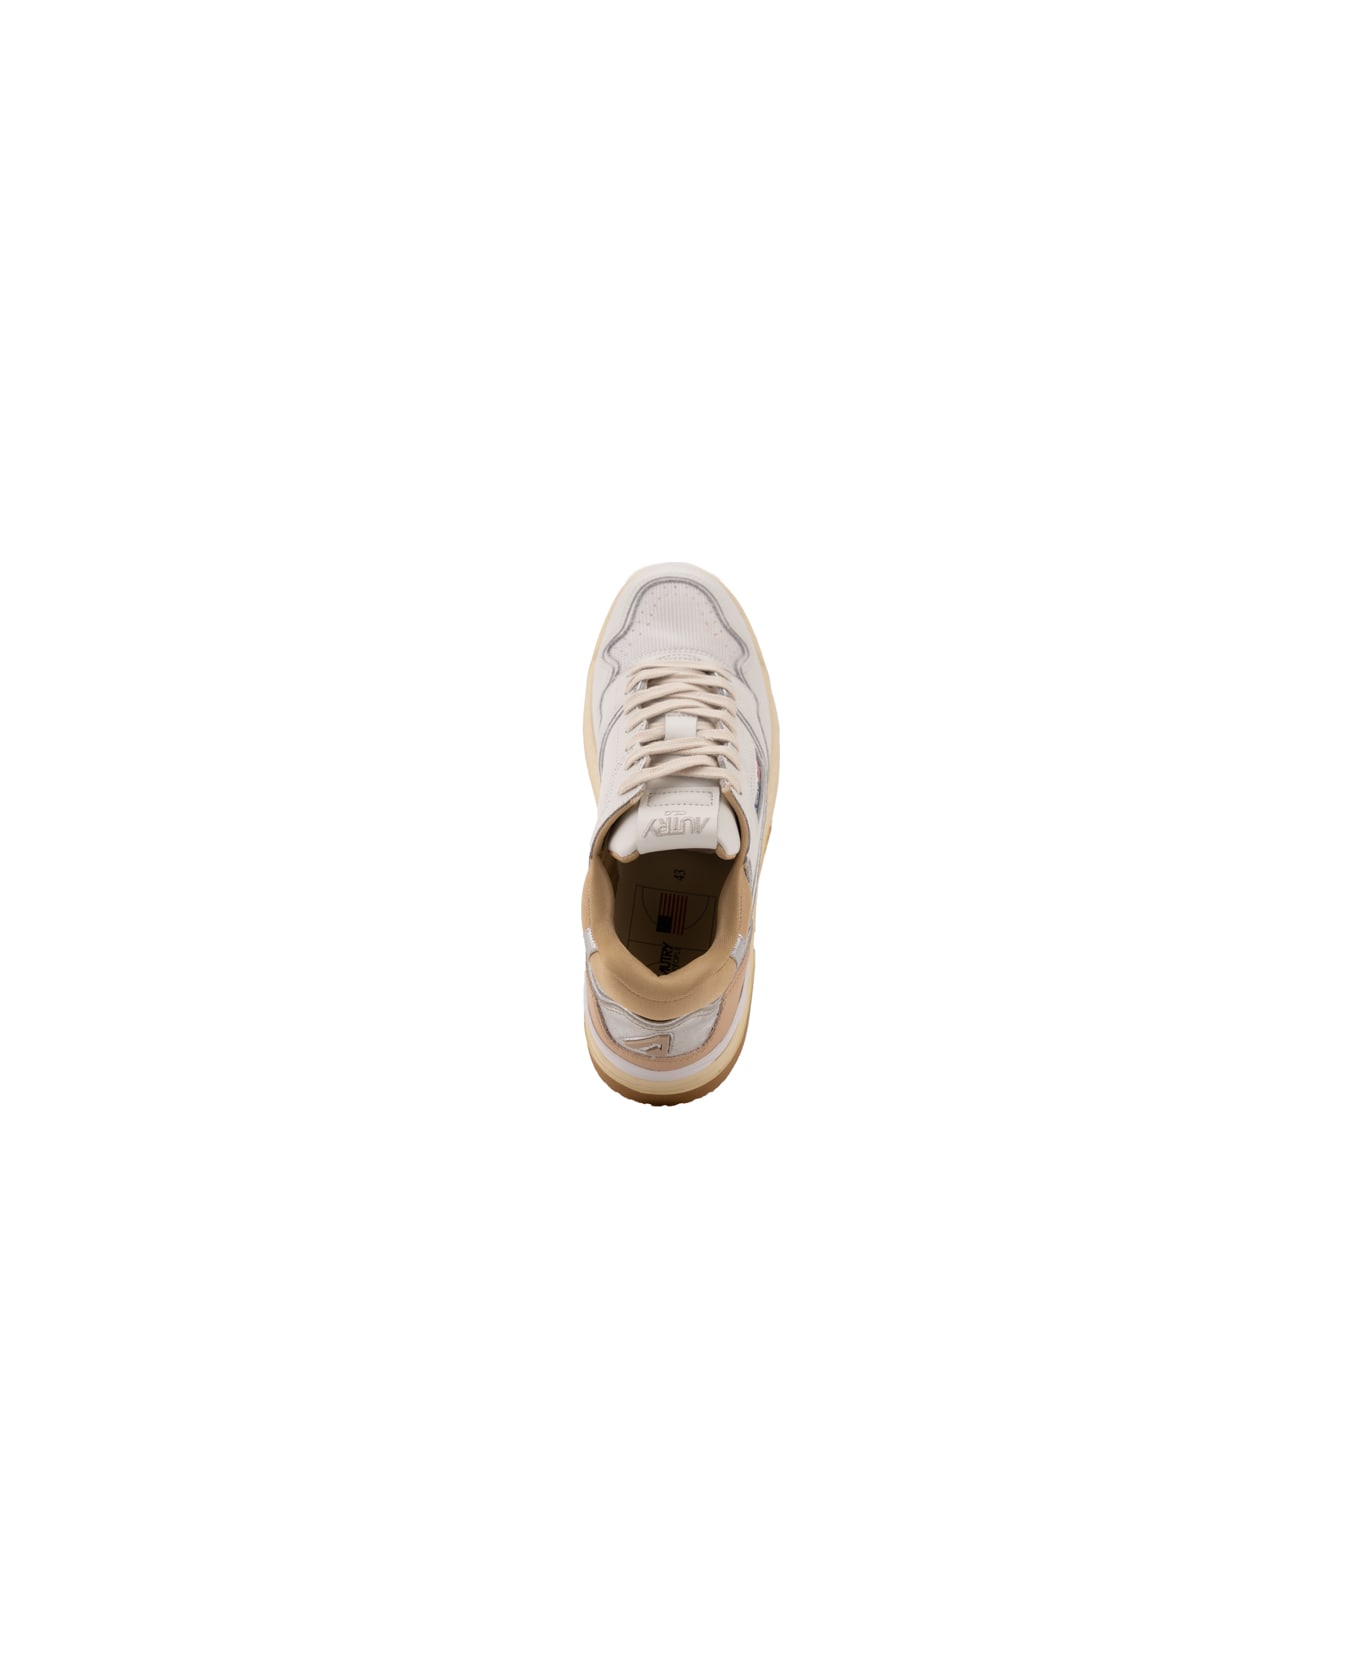 Autry Clc Sneakers - Wht/silv/candging